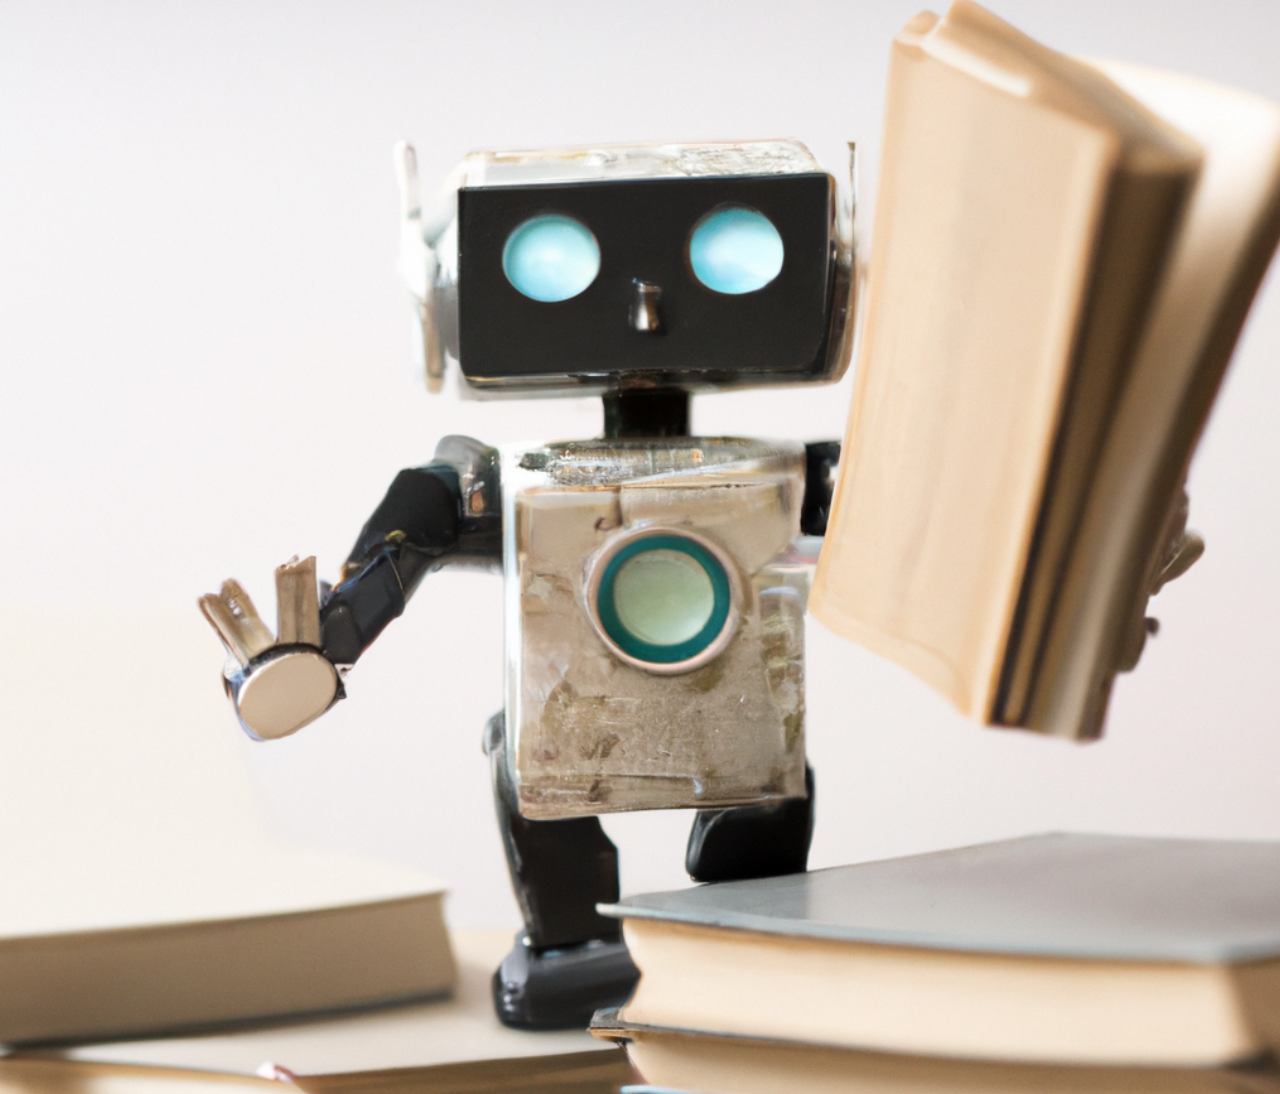 Robot with books